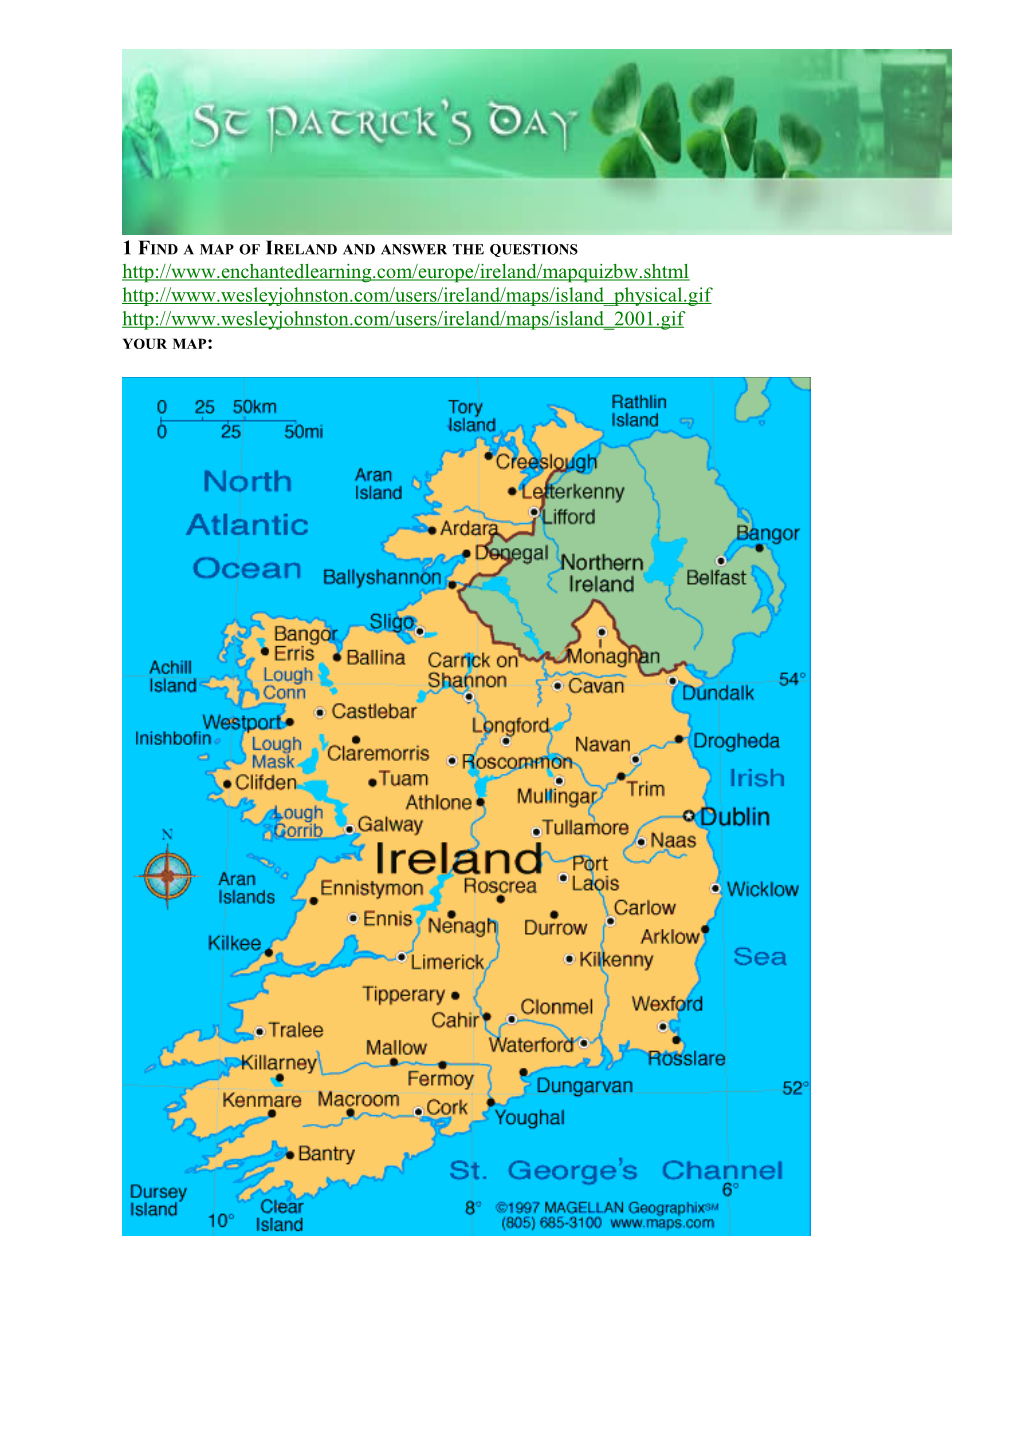 1 Find a Map of Ireland and Answer the Questions